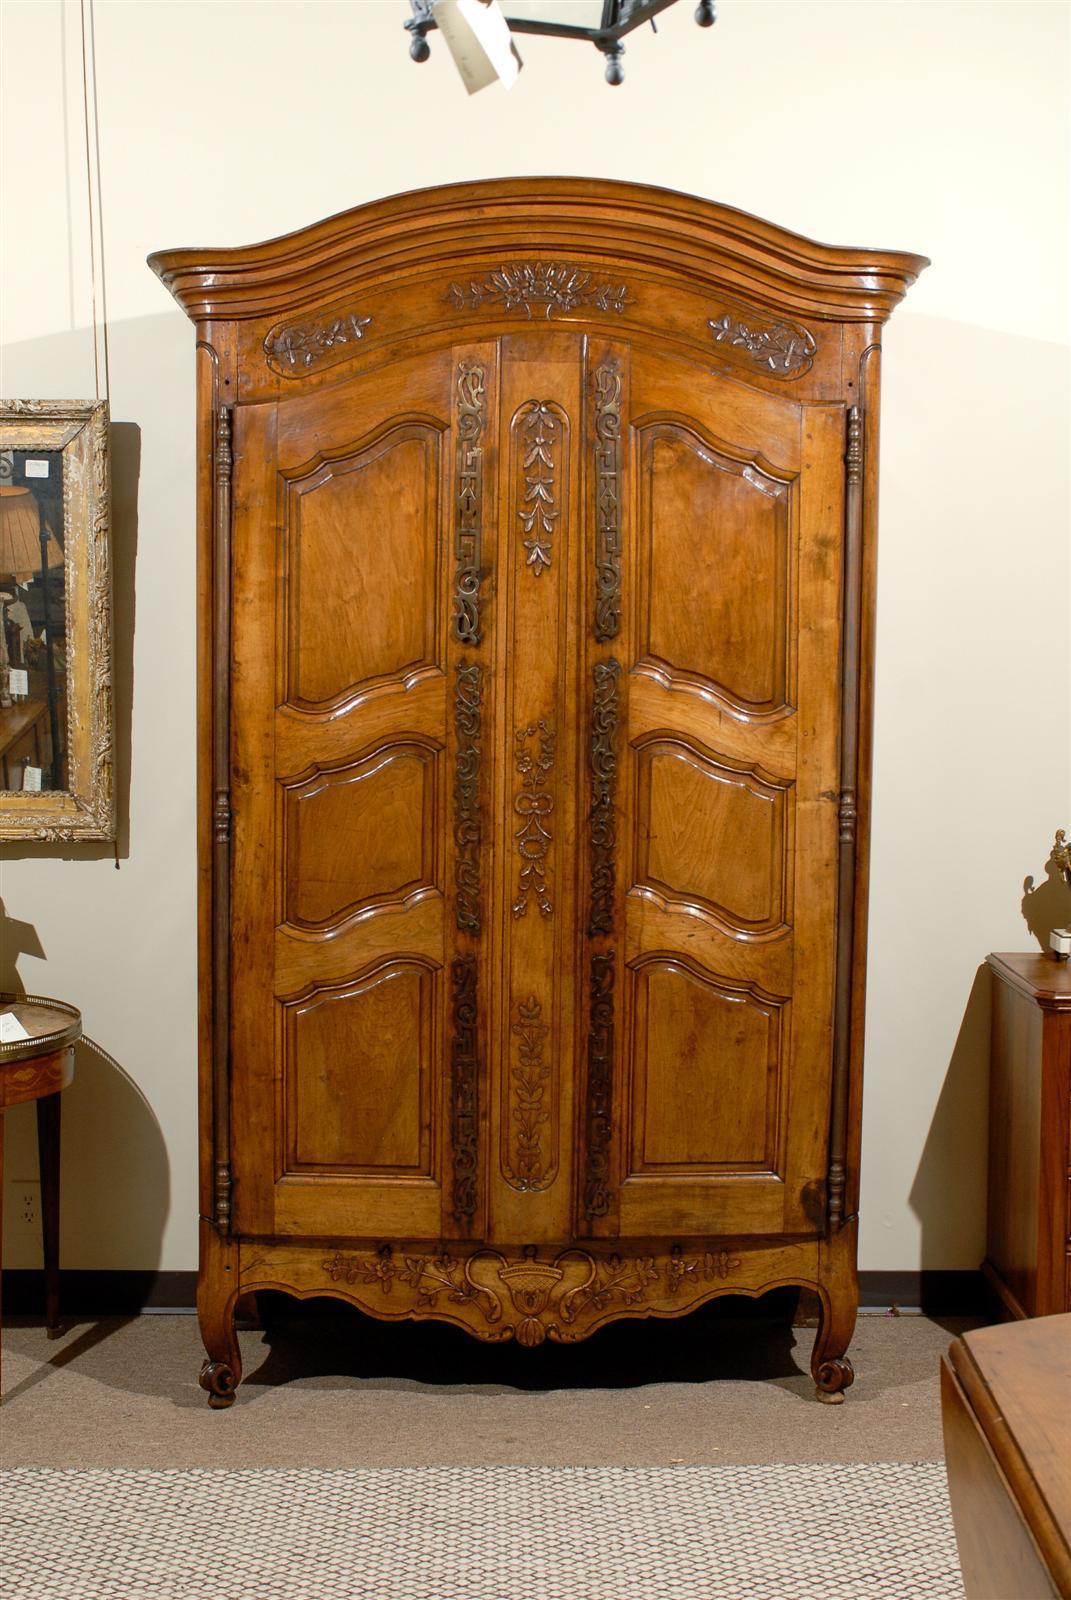 This is a finely carved French armoire in solid walnut.  It is late 18th century from the Provence region.  Details include three paneled doors, a classic curved top, and elegant scroll feet.  The original iron hardware adds to the overall design.